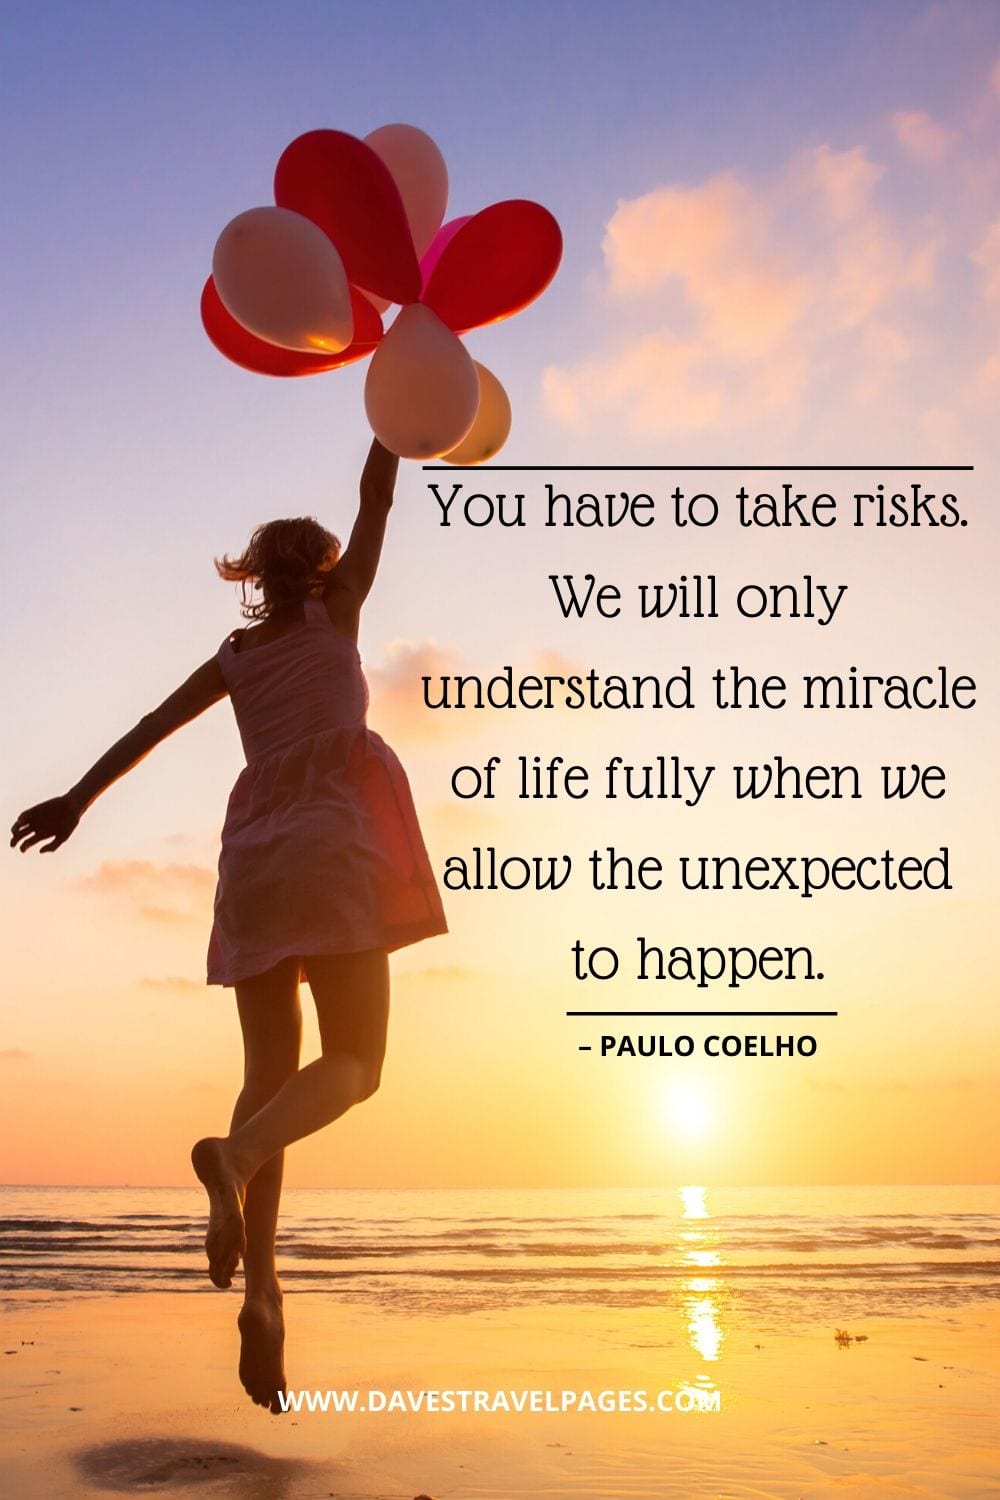 “You have to take risks. We will only understand the miracle of life fully when we allow the unexpected to happen.” – Quotes Paulo Coelho